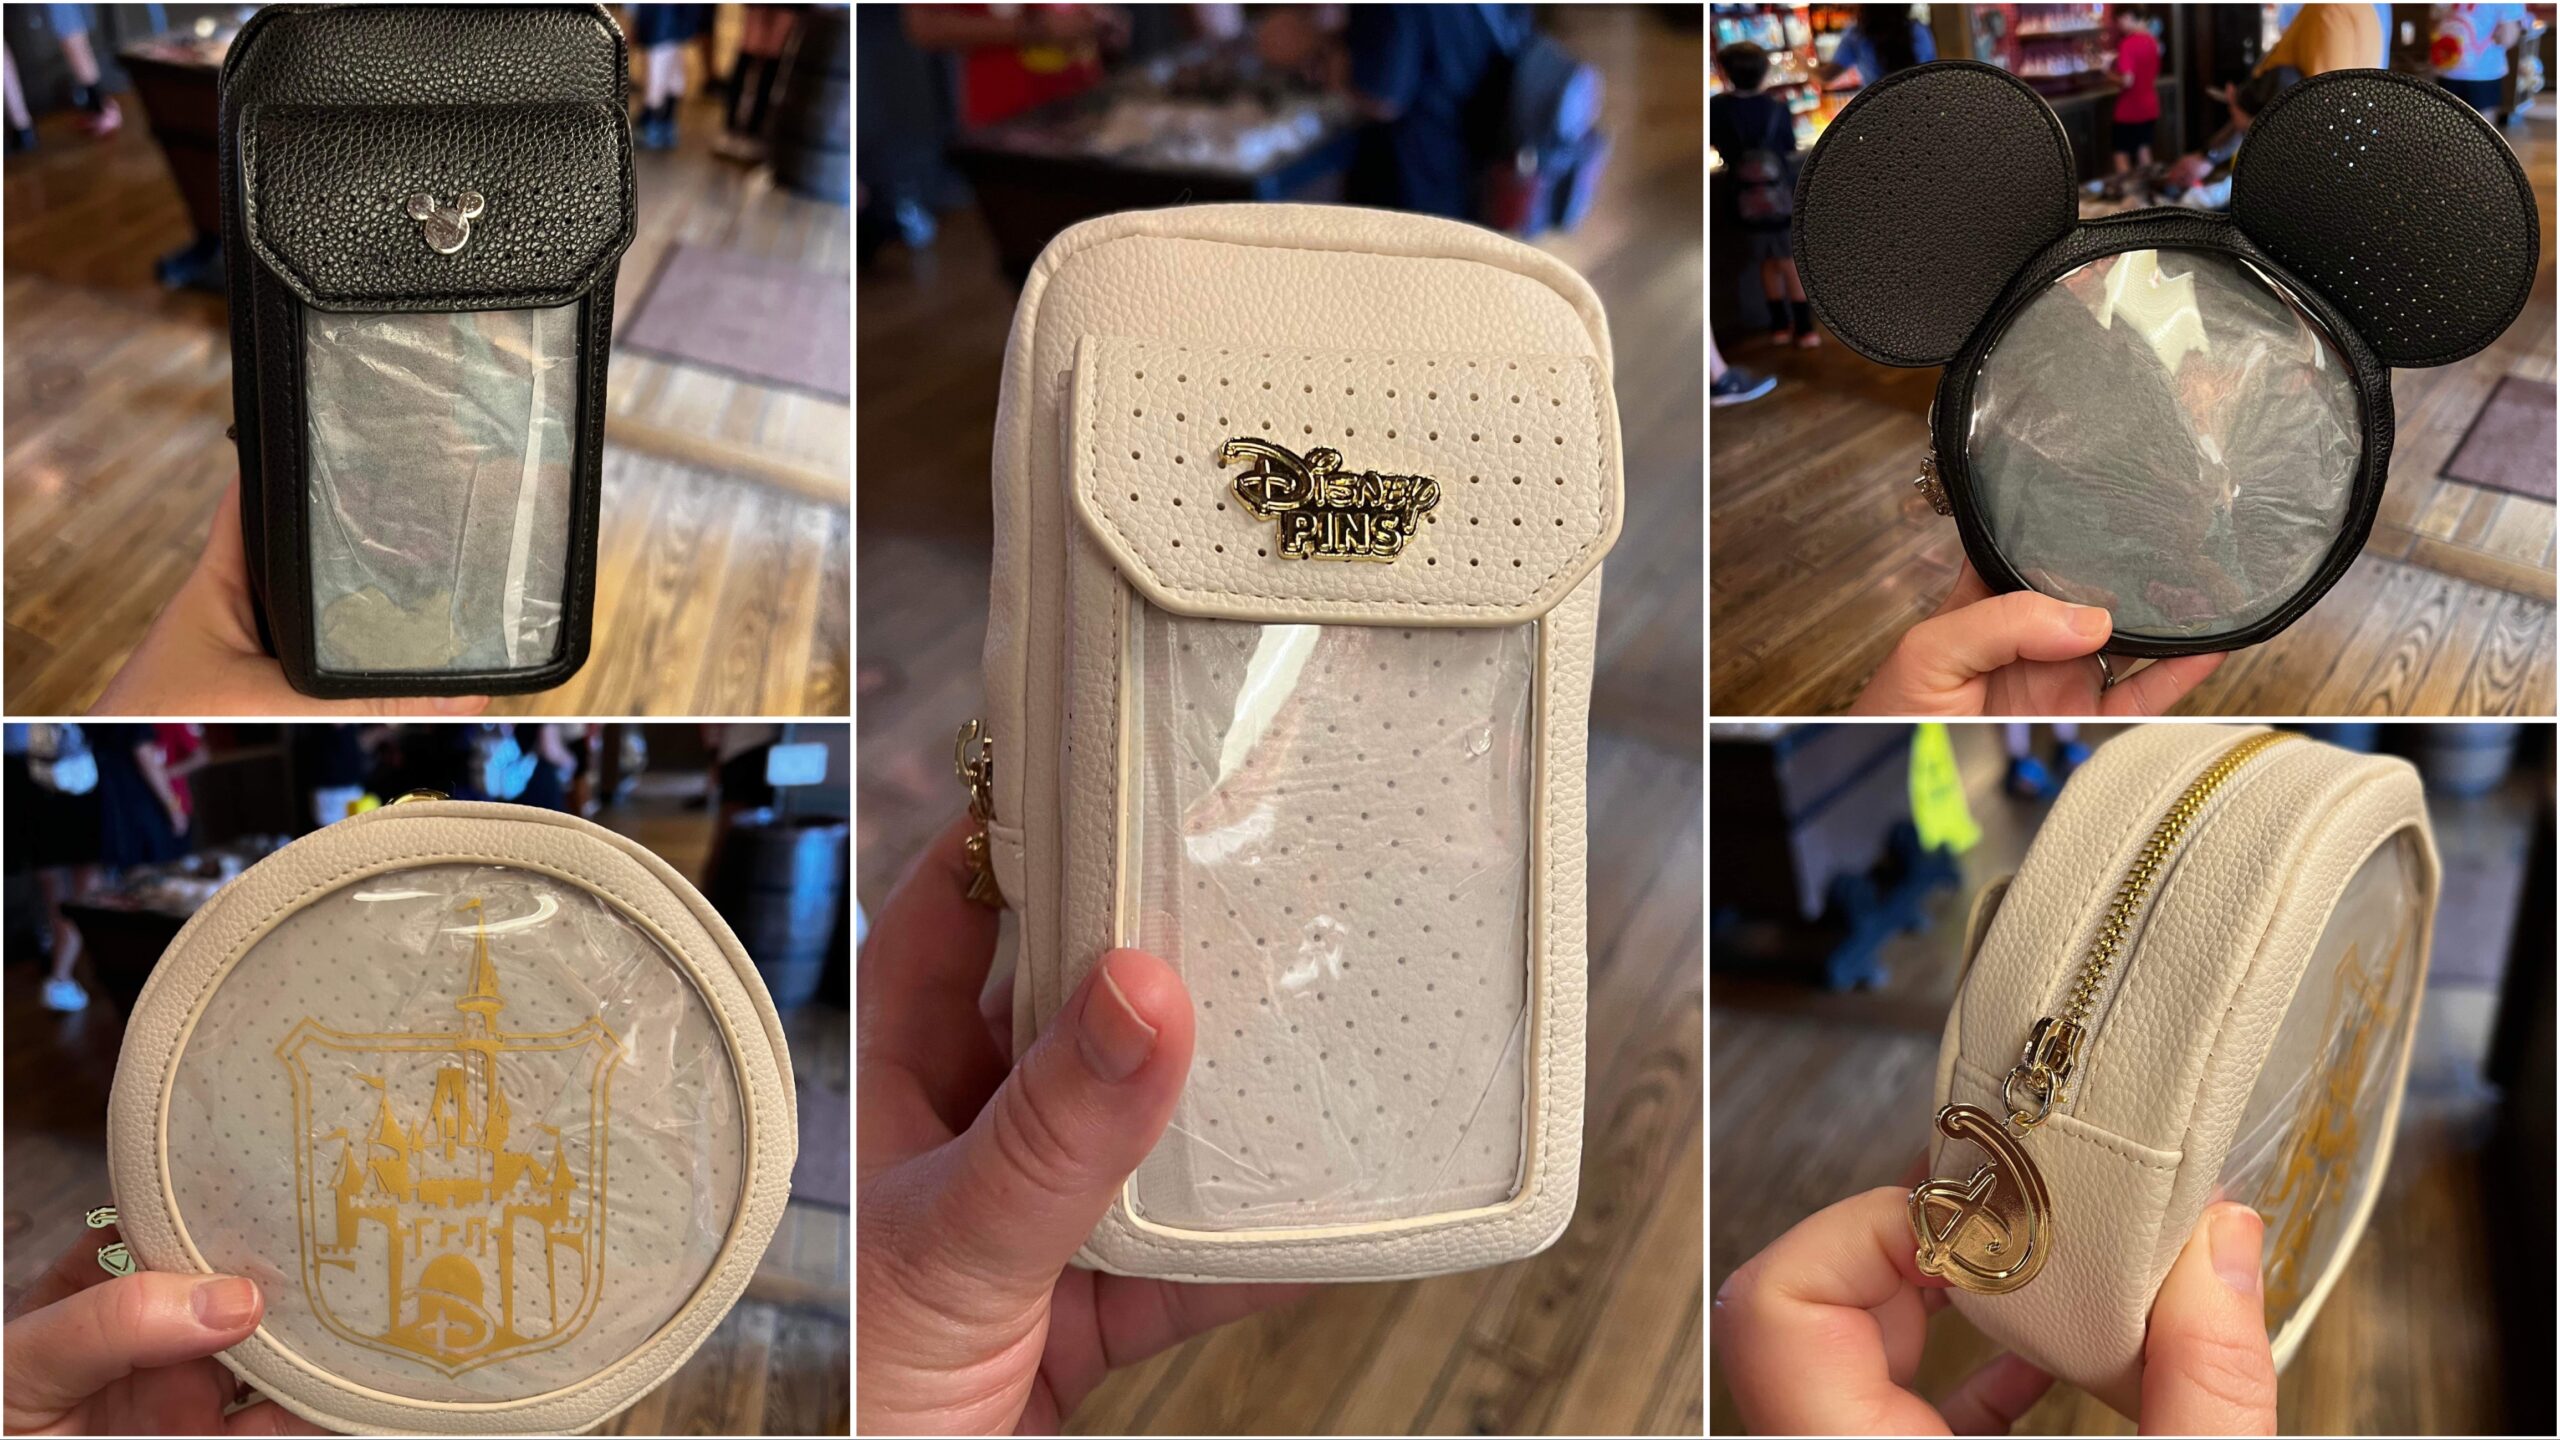 These New Disney Bags are Designed to Show Off Your Pin Collection!